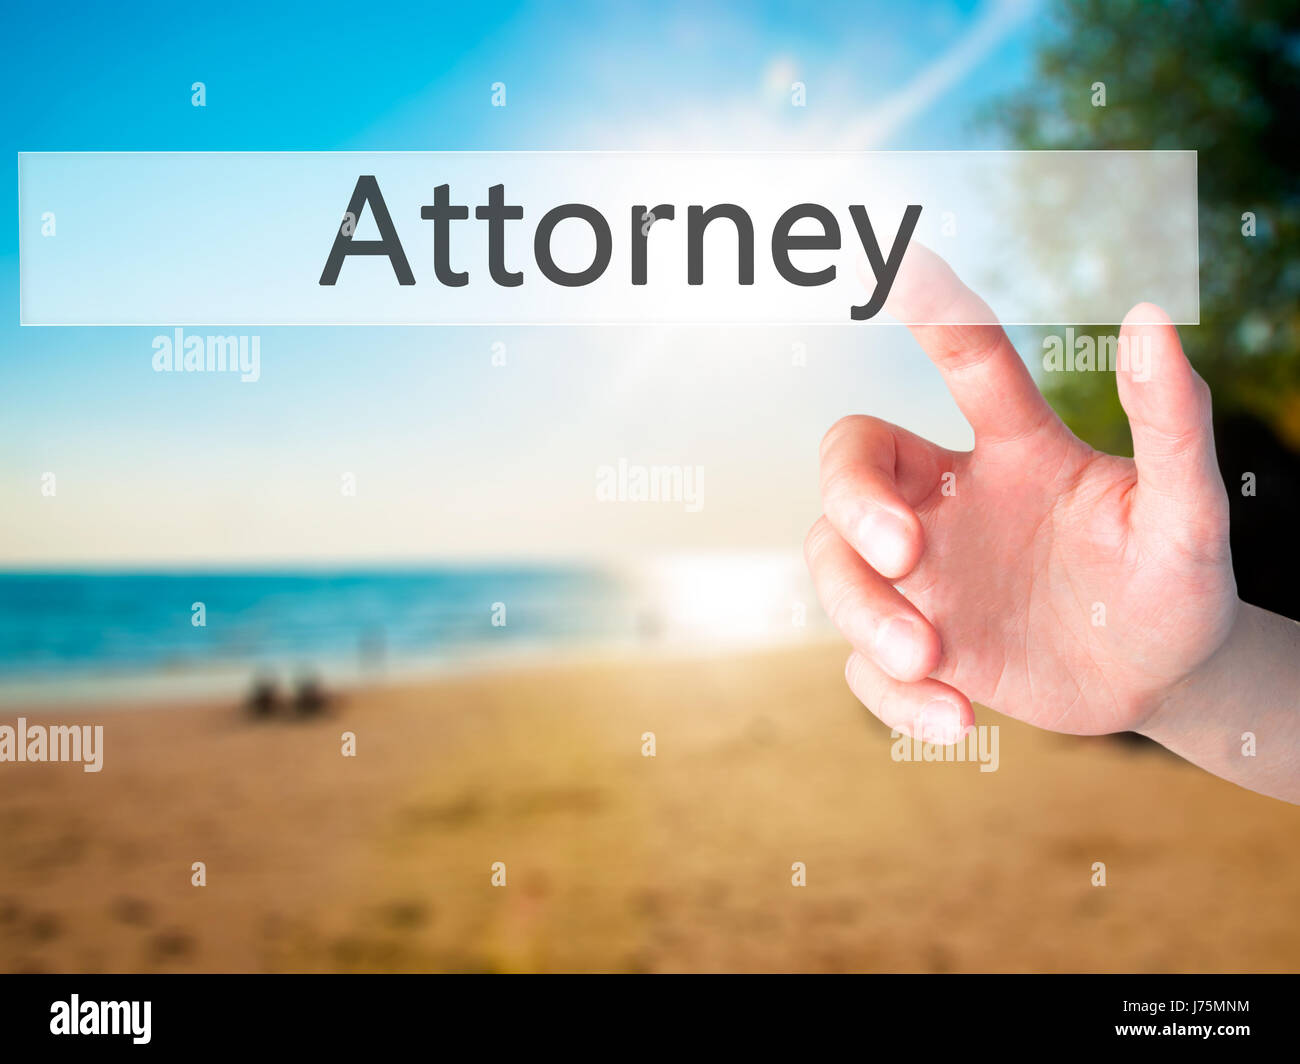 Attorney - Hand pressing a button on blurred background concept . Business, technology, internet concept. Stock Photo Stock Photo